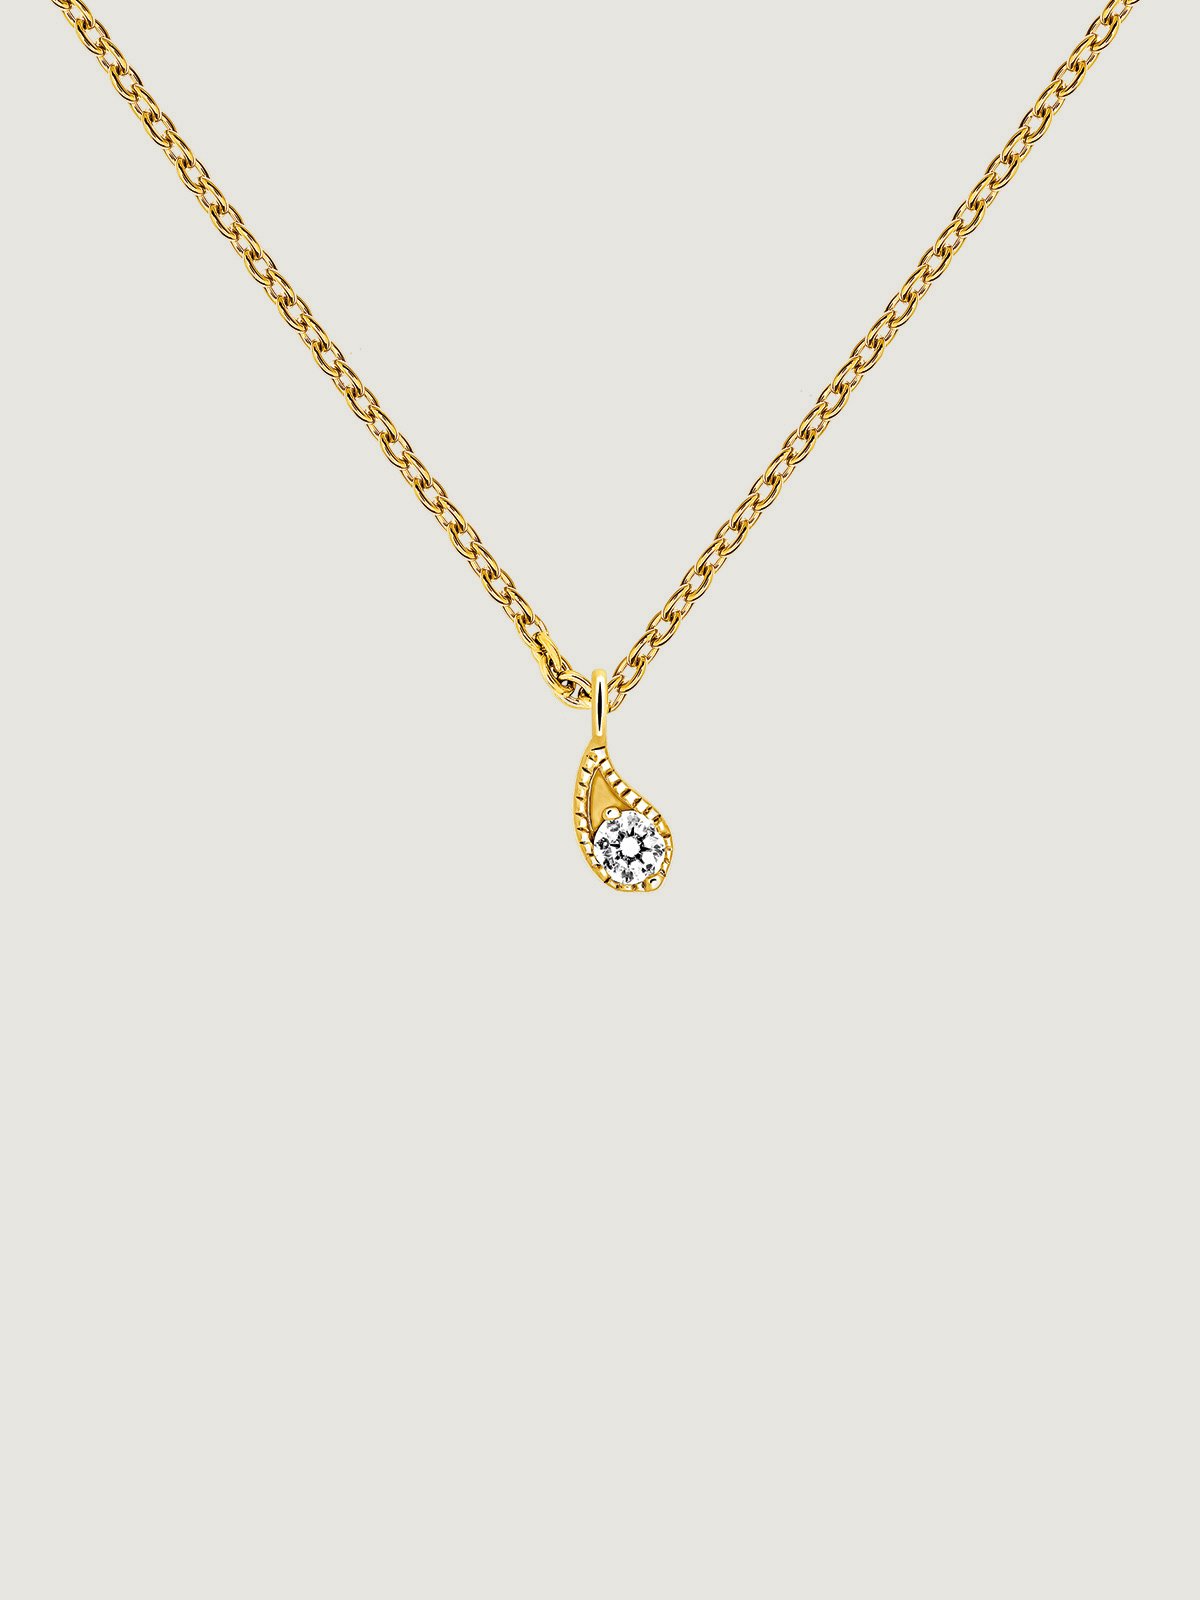 9K Yellow Gold Pendant with Drop and White Diamonds